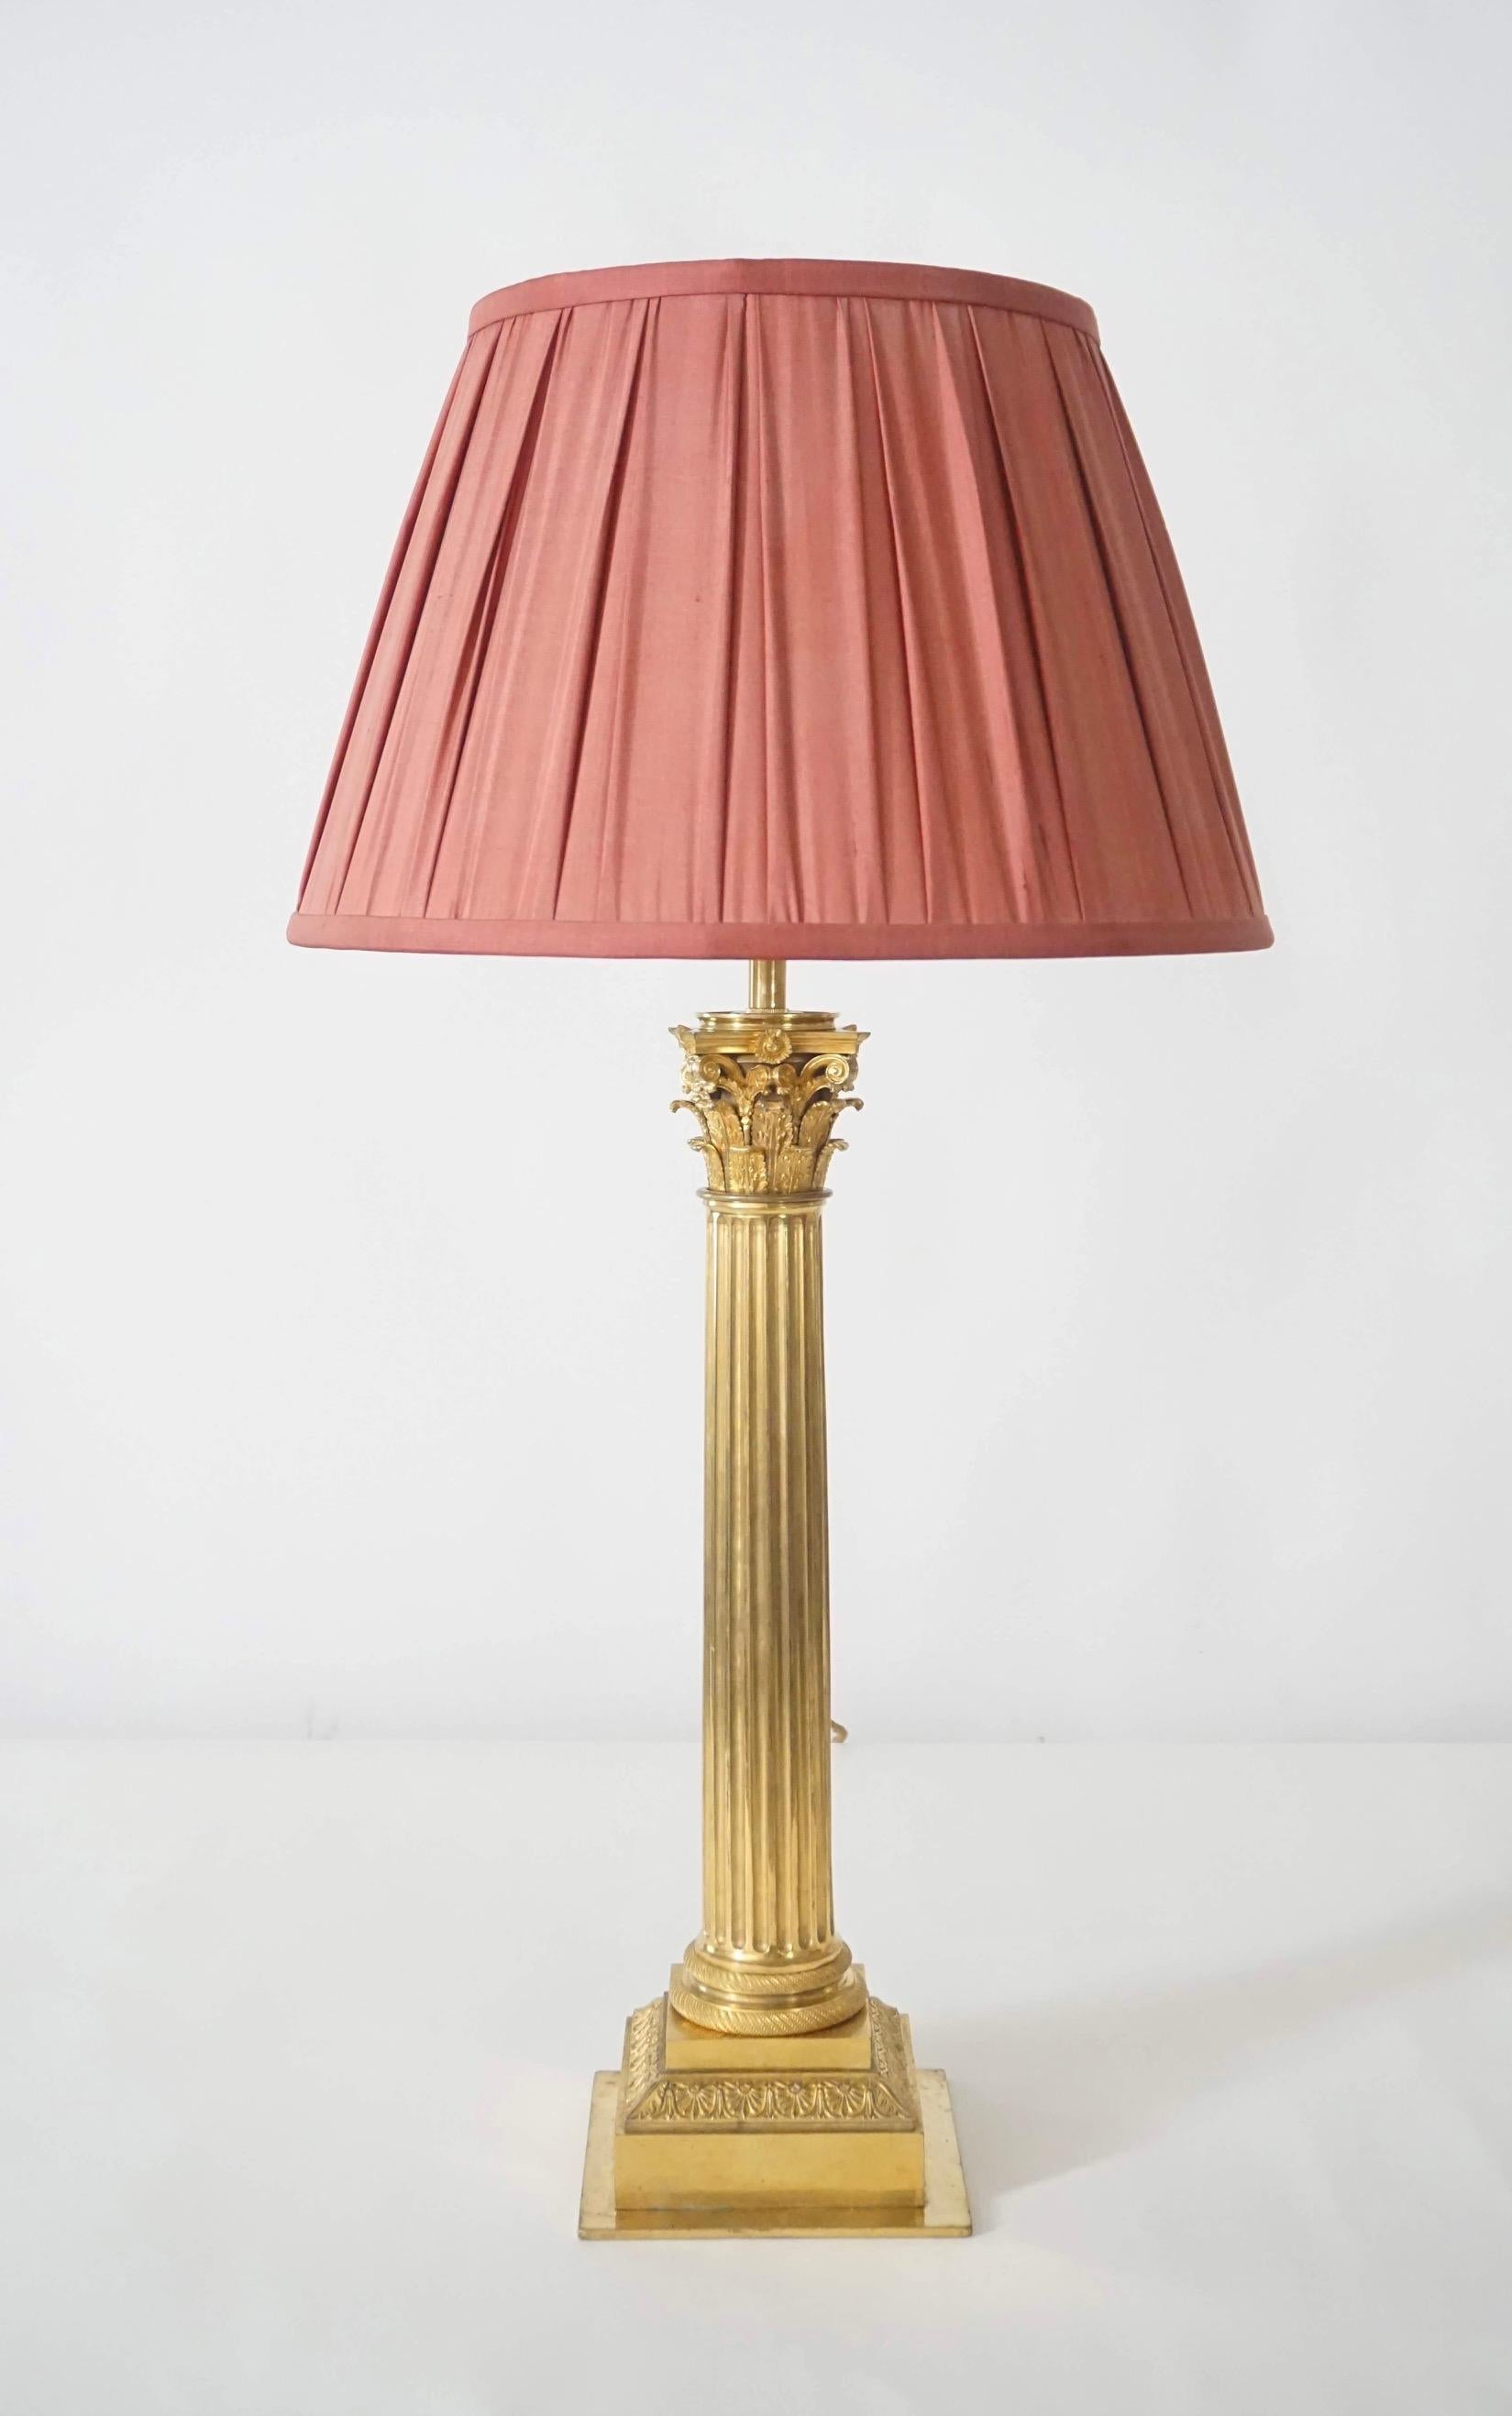 Hand-Crafted Ormolu Corinthian Column Sinumbra Base Table Lamps, France, circa 1825 For Sale